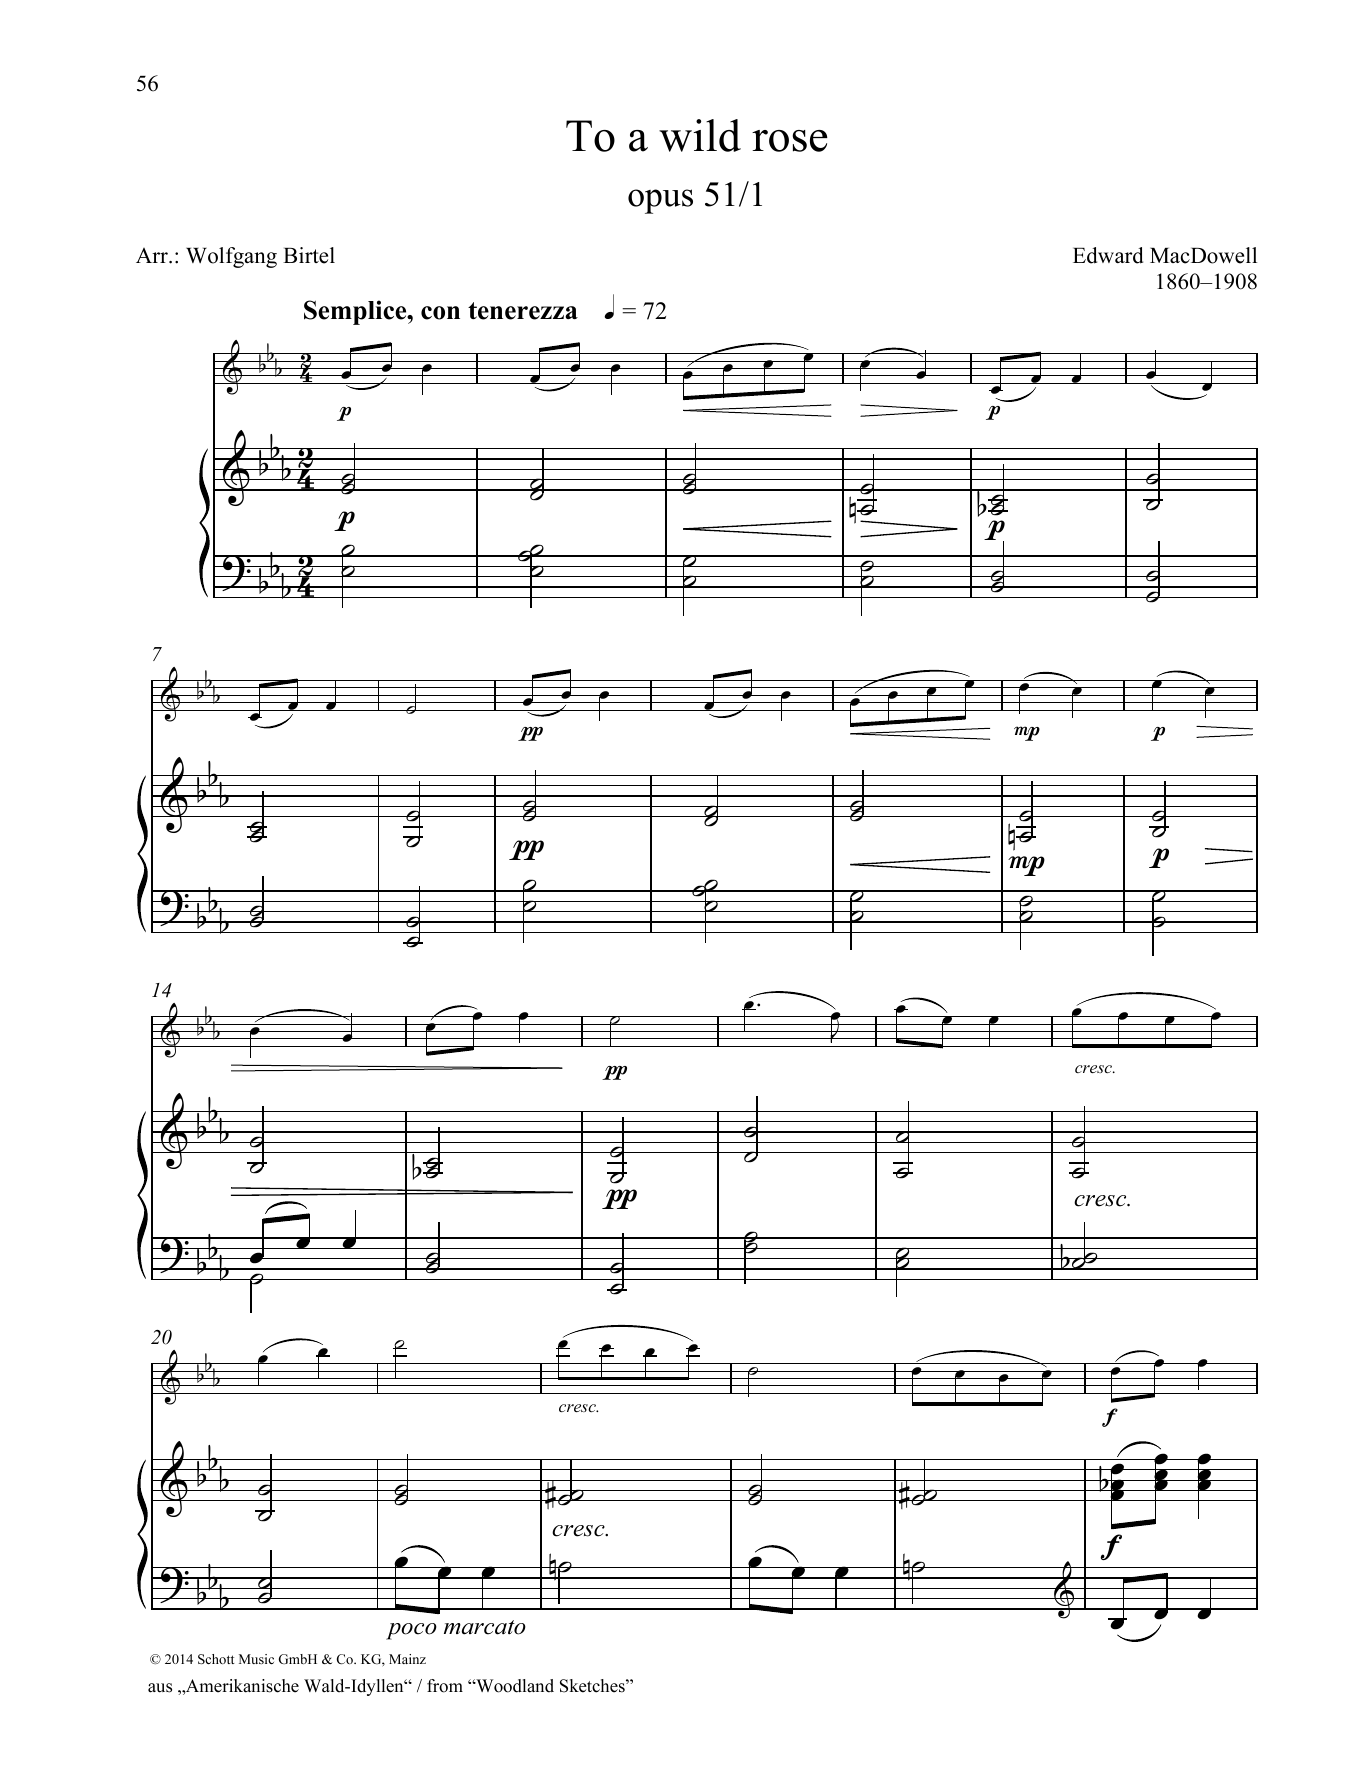 Download Edward MacDowell To a Wild Rose Sheet Music